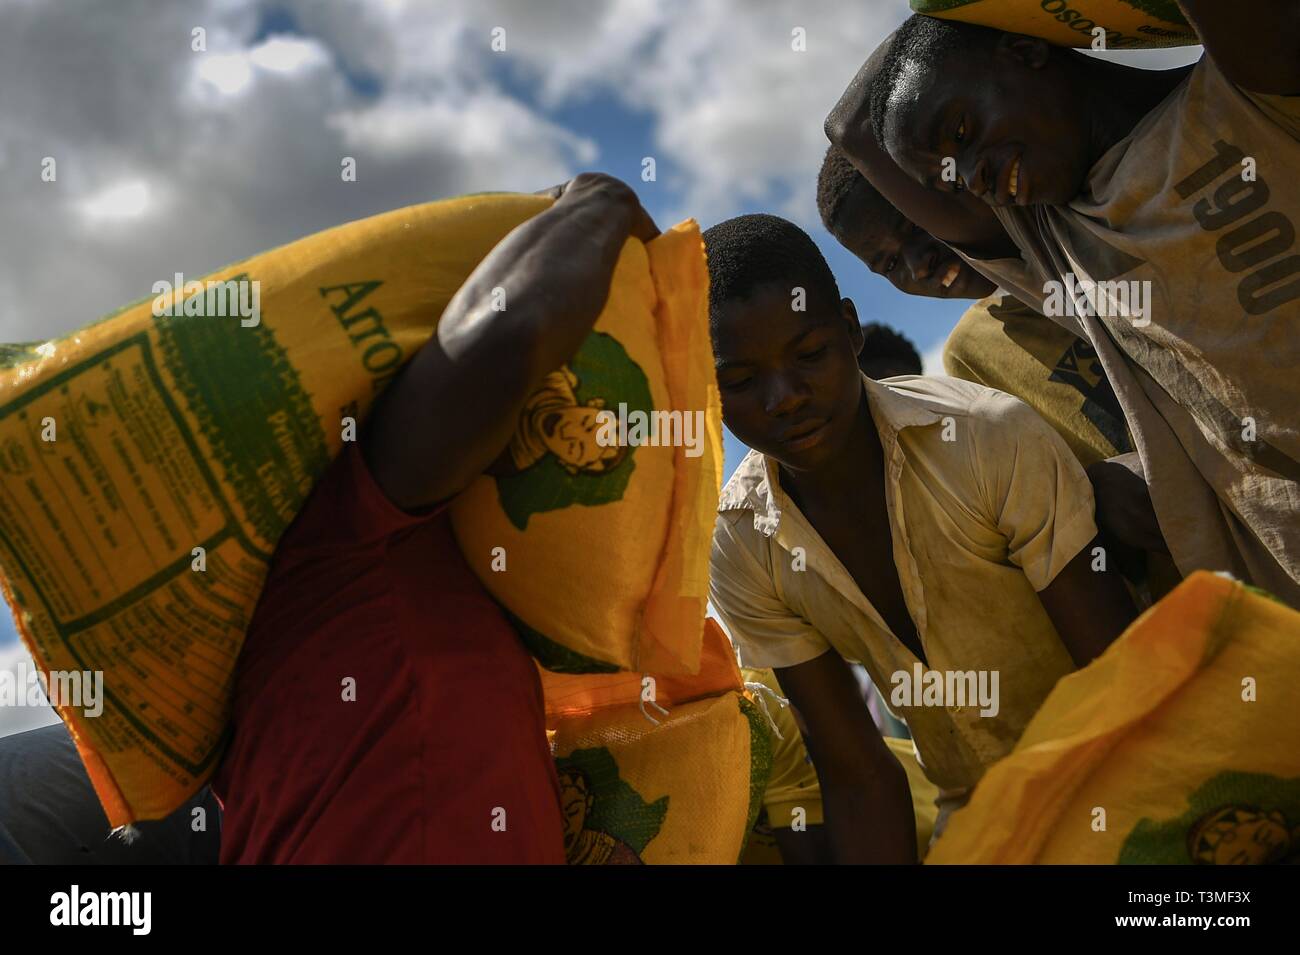 Local volunteers assist in unloading food aid from a helicopter in the aftermath of the massive Cyclone Idai April 8, 2019 near Bebedo, Mozambique. The World Food Programme, with help from the U.S. Air Force is transporting emergency relief supplies to assist the devastated region. Stock Photo